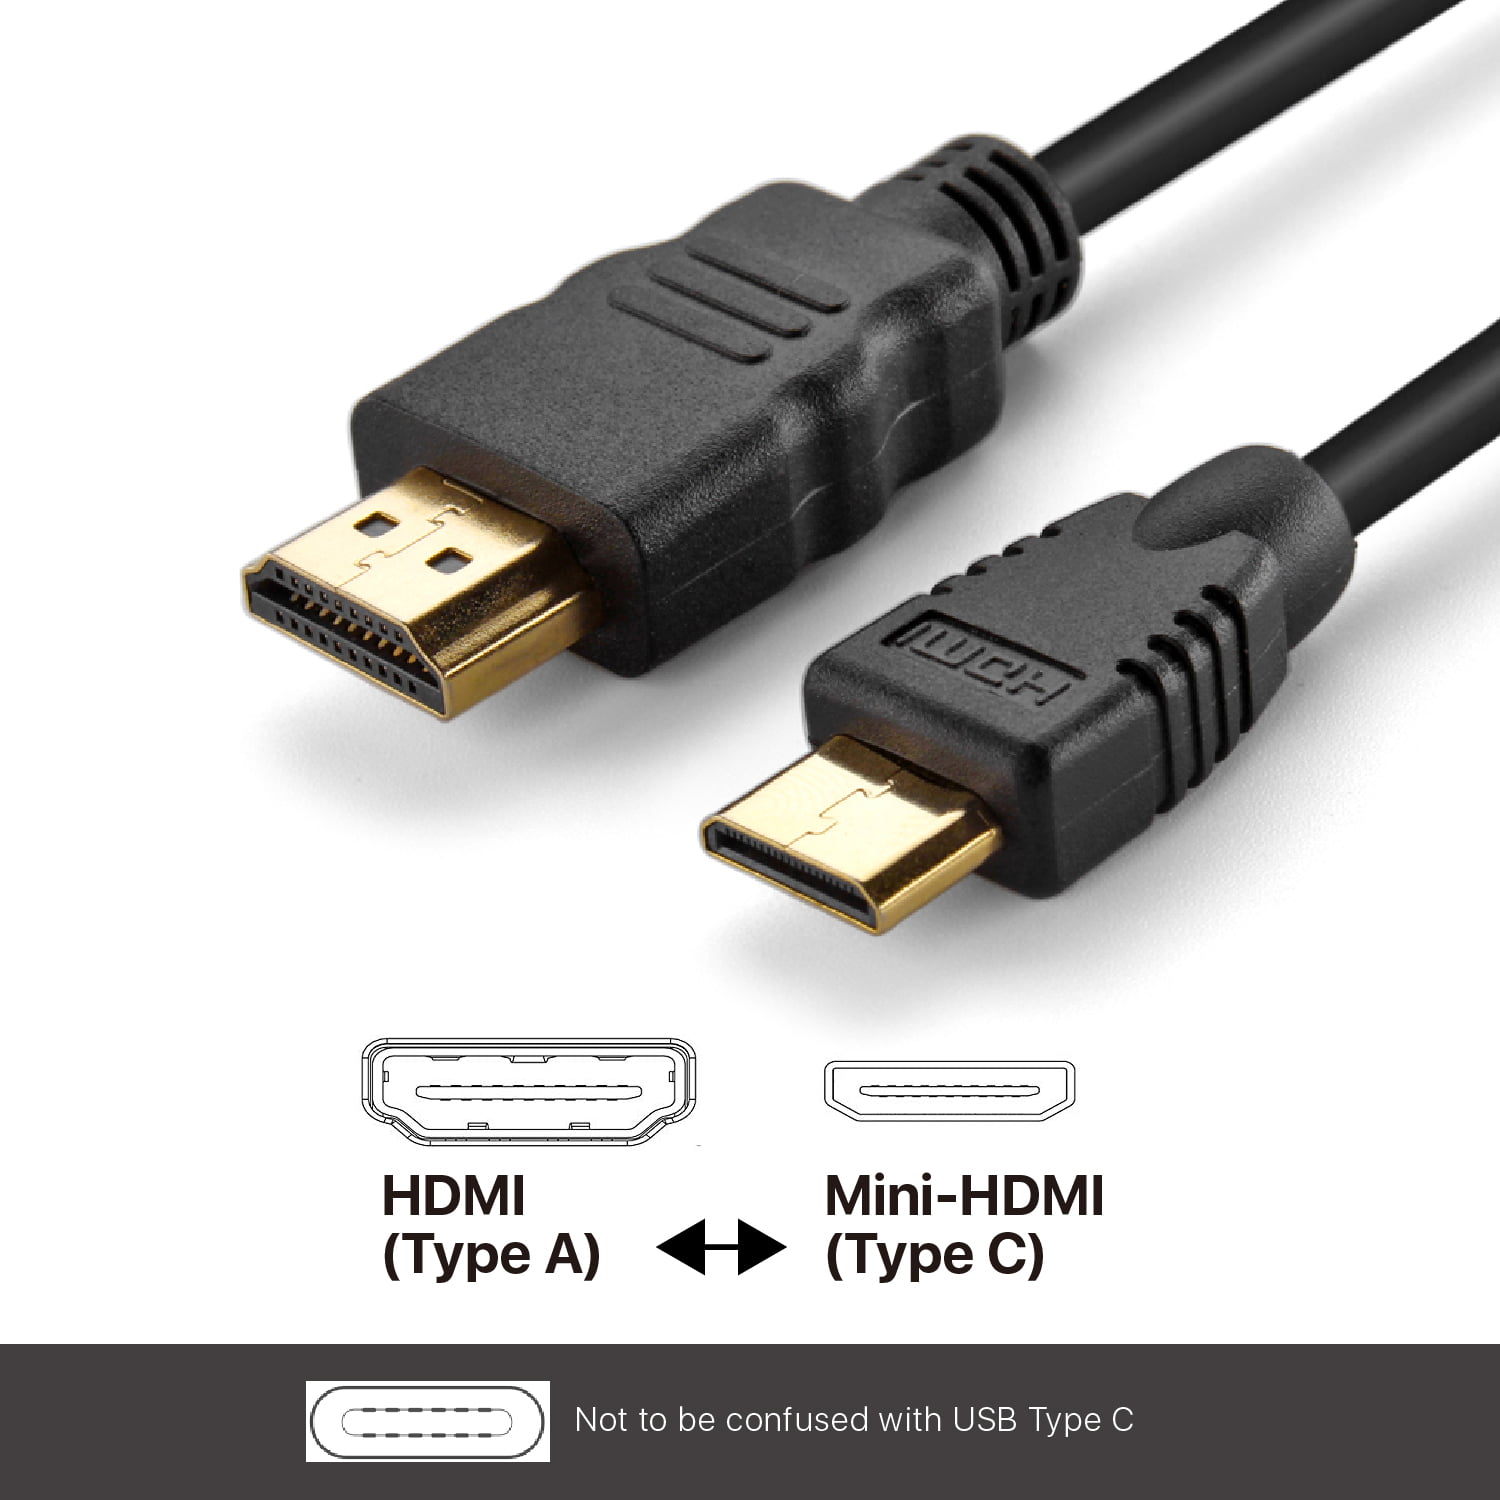 Suri Med venlig hilsen automat TNP Products Mini HDMI (Type C) to HDMI (Type A) Cable (10 Feet) Adapter -  High Speed Video Audio AV HDMI Male C to Male a Premium Connector Converter  Adaptor Cord Supports